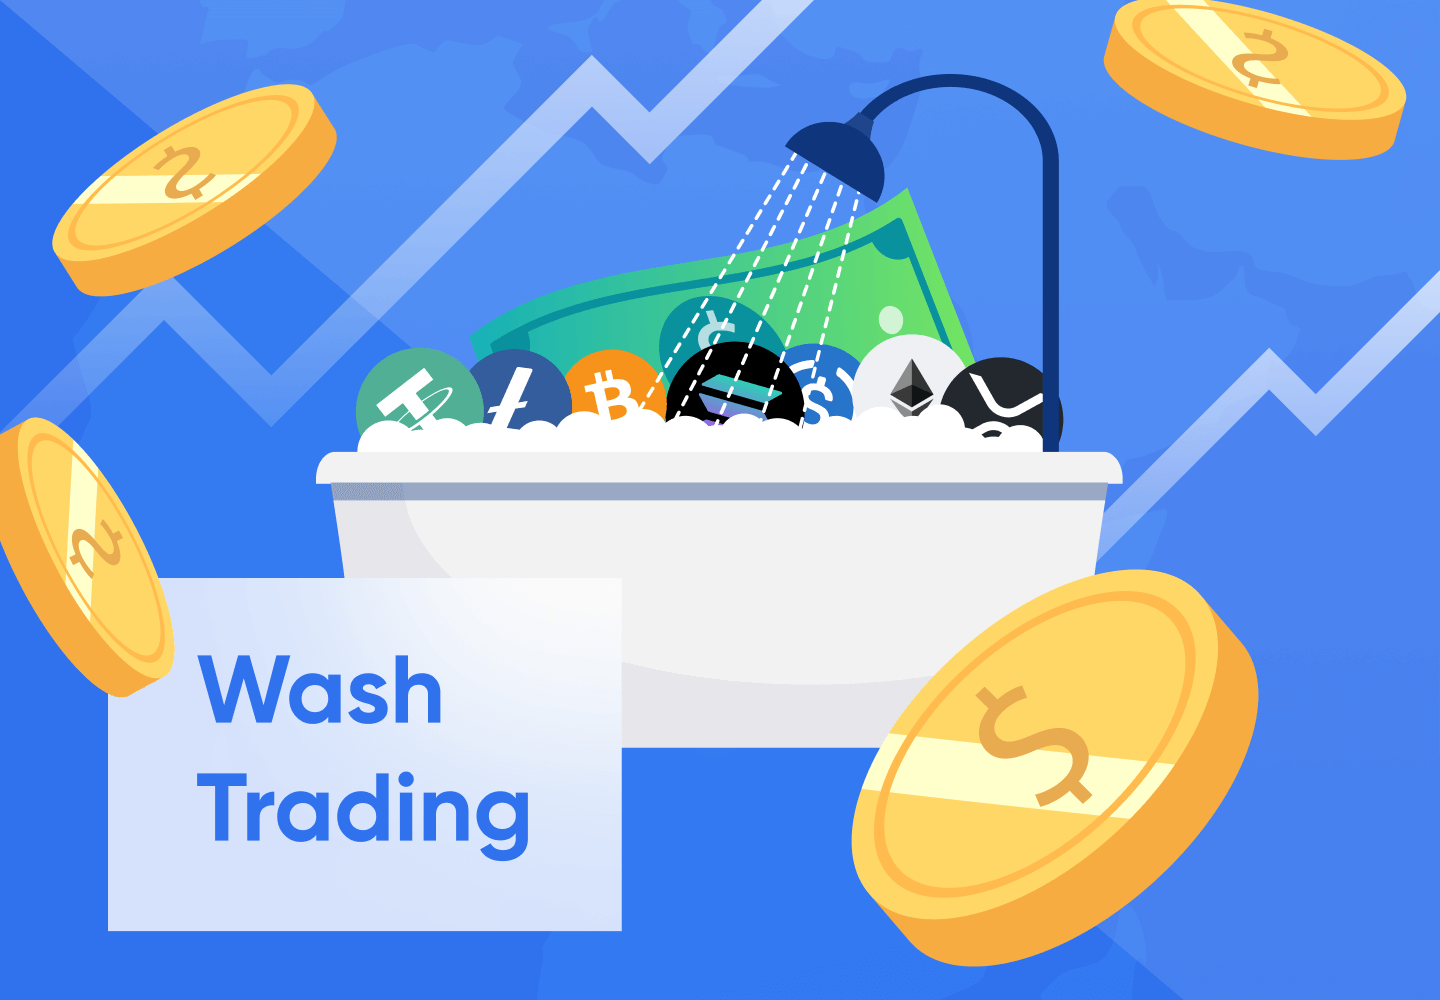 What is Wash Trading?